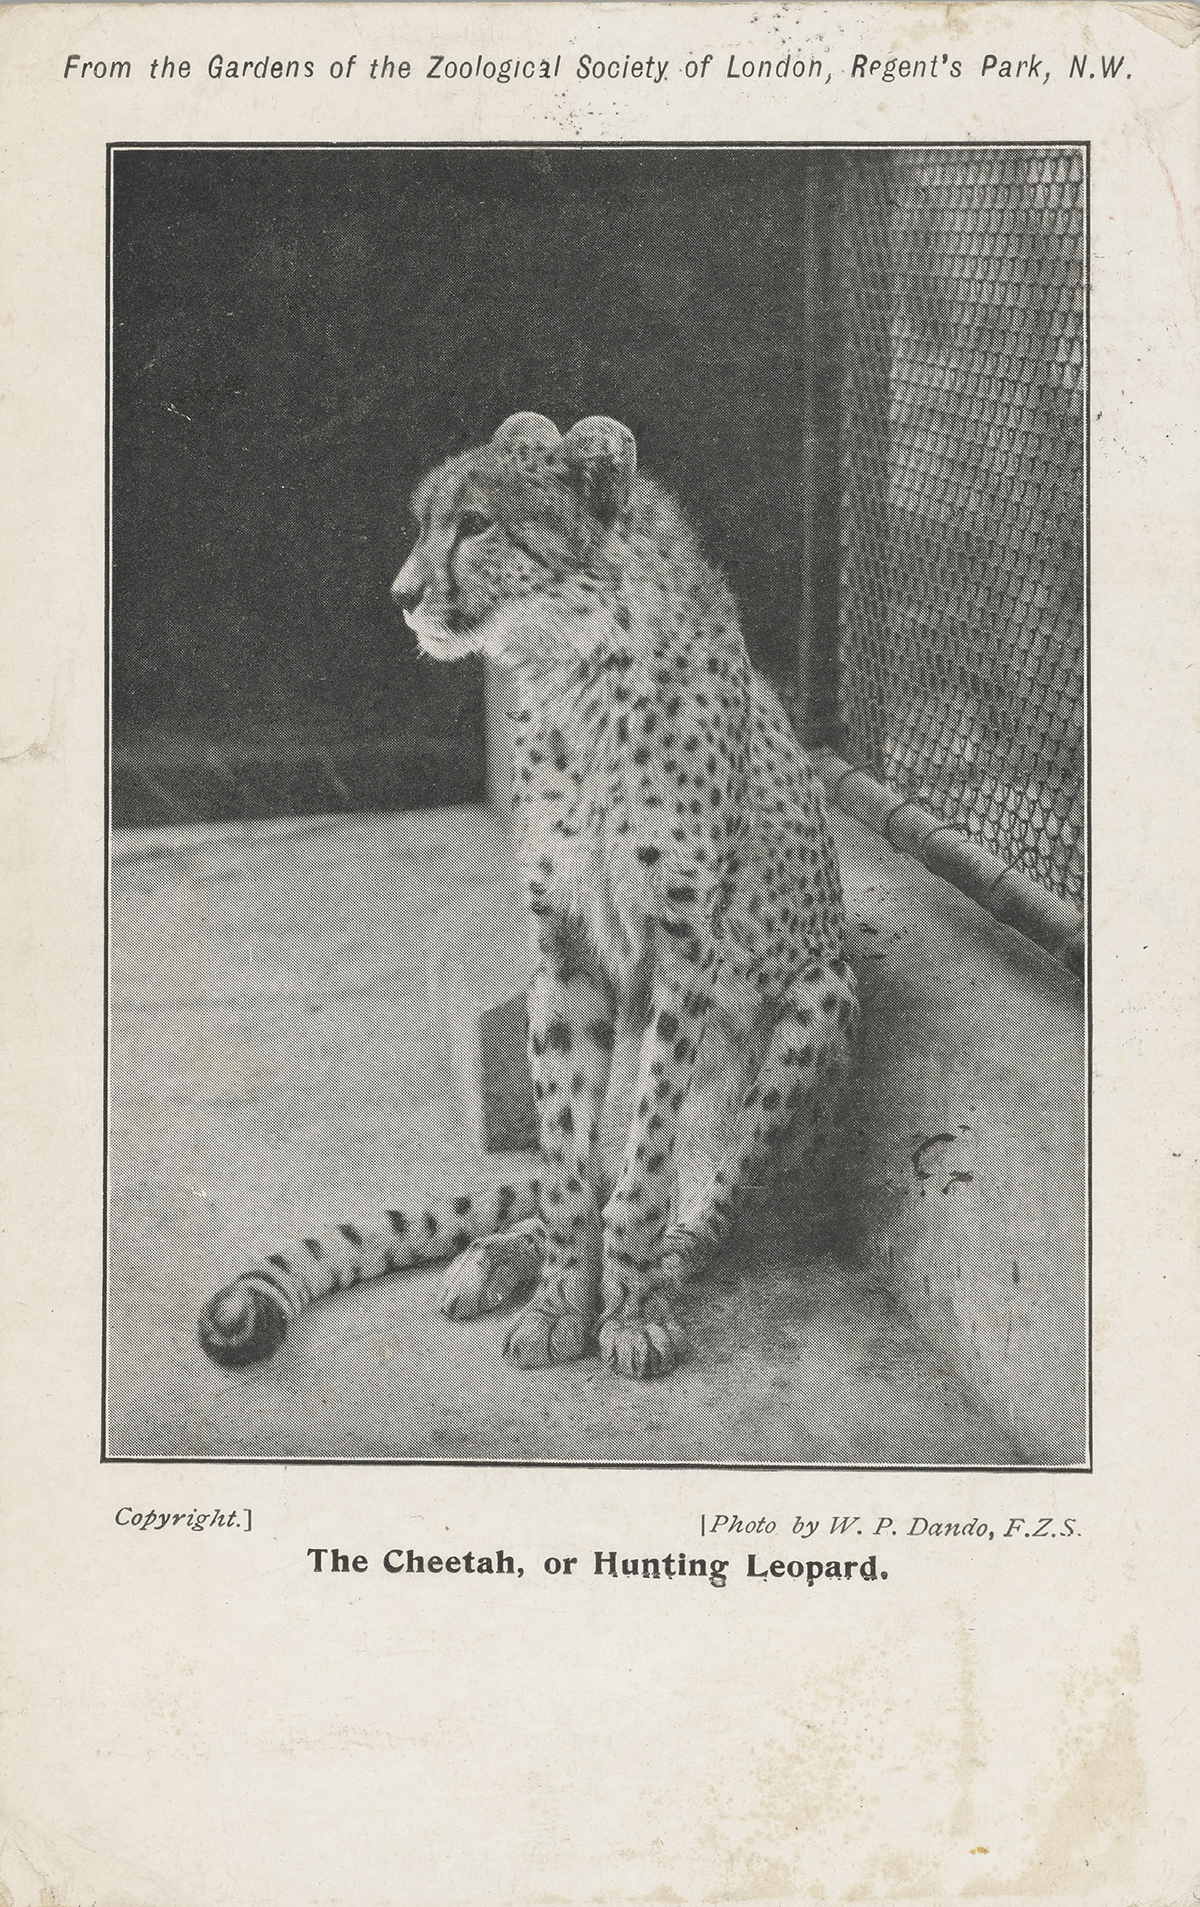 Postcard of a Cheetah at the Gardens of the Zoological Society of London, Regent’s Park, September 1905, PH64ZD/30